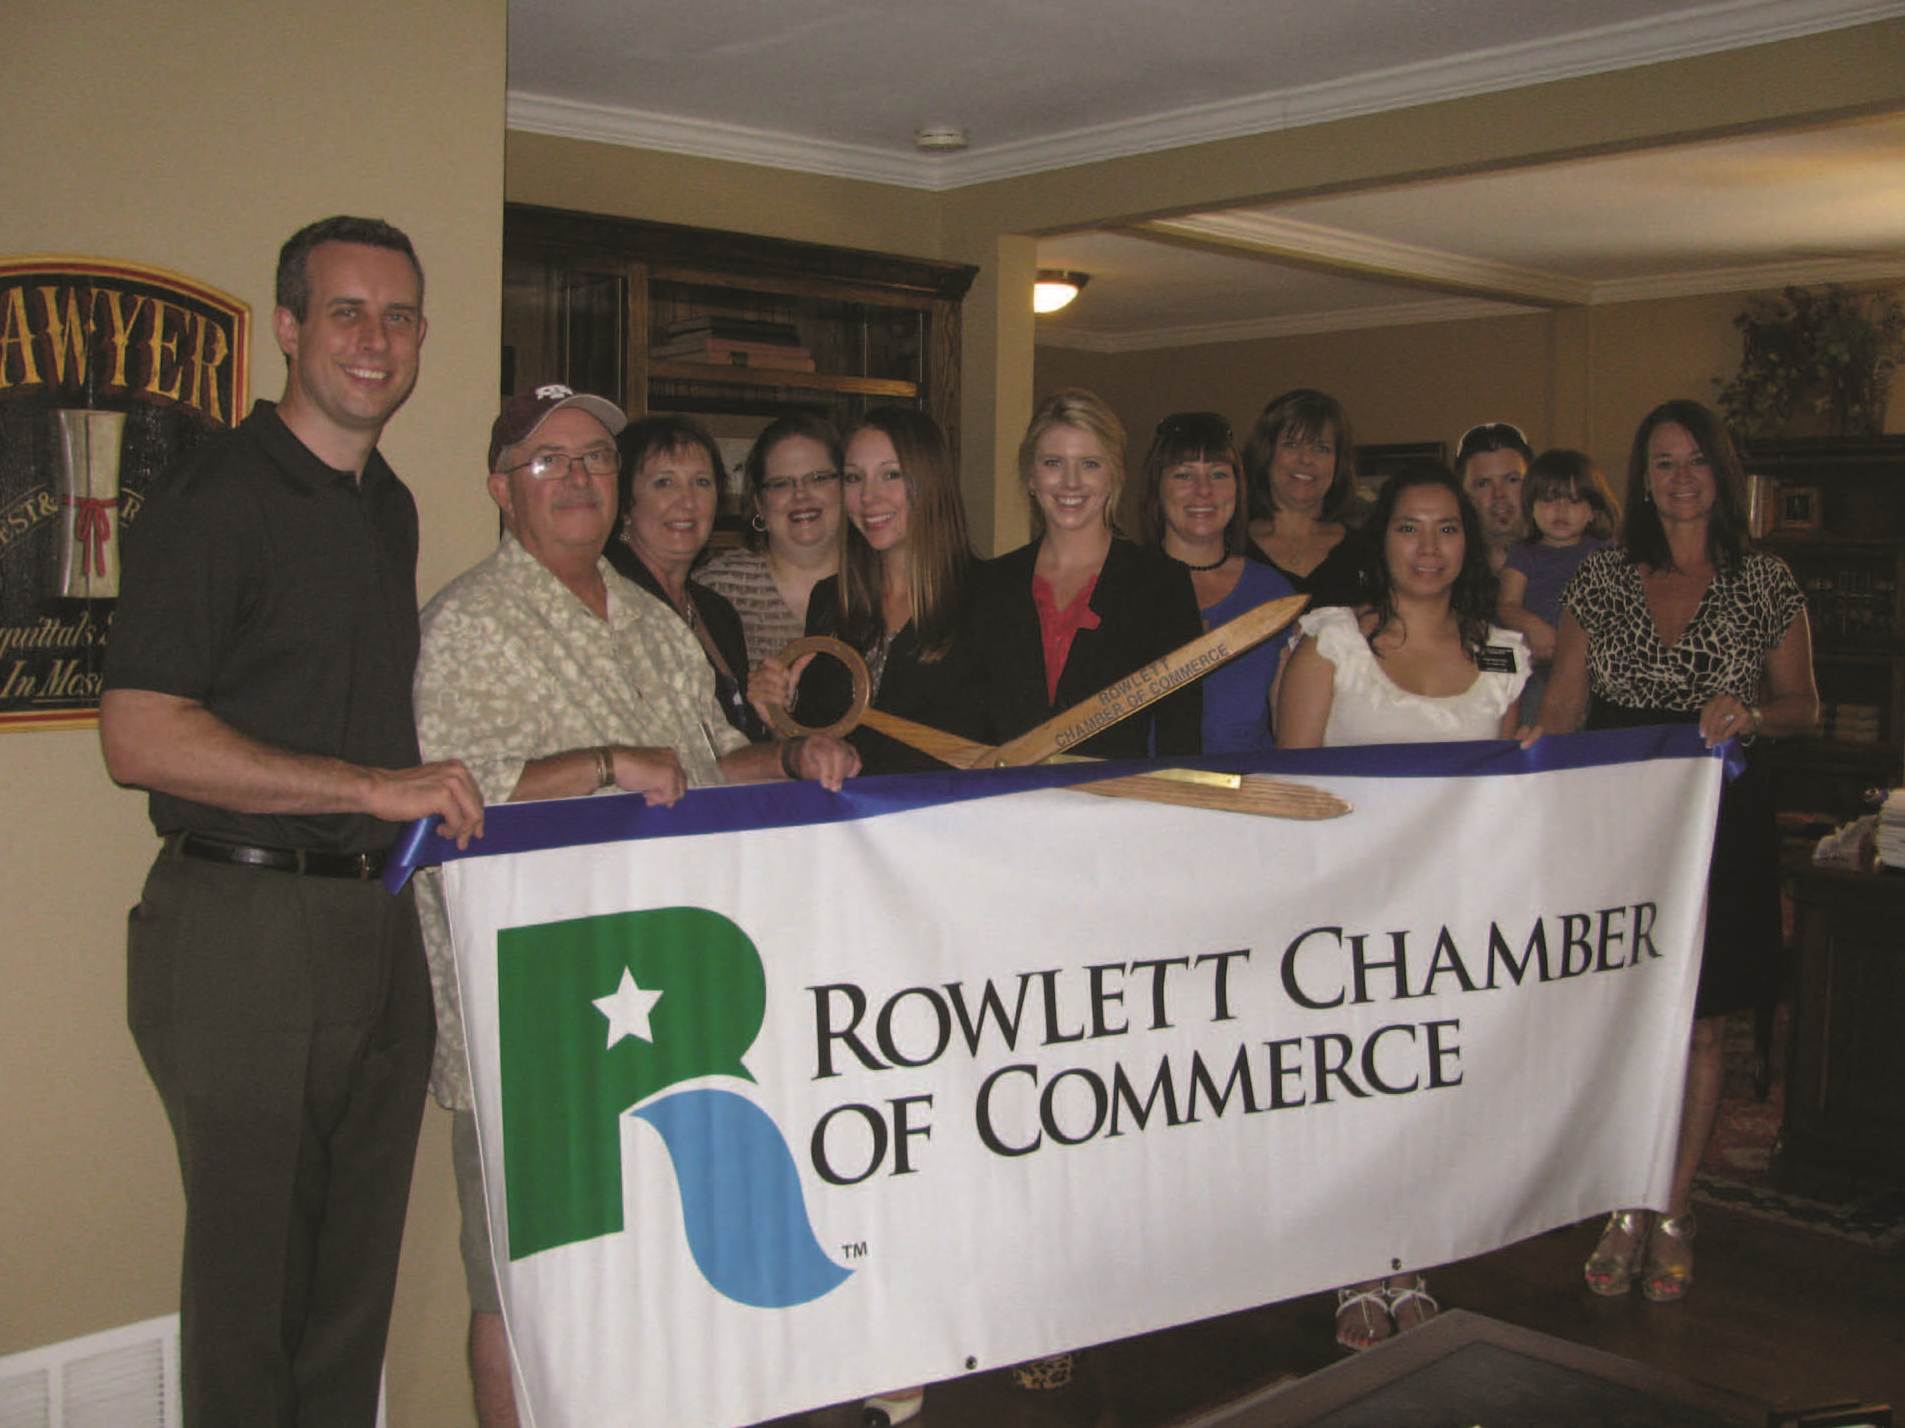 Rowlett Chamber welcomes Olson Law Firm